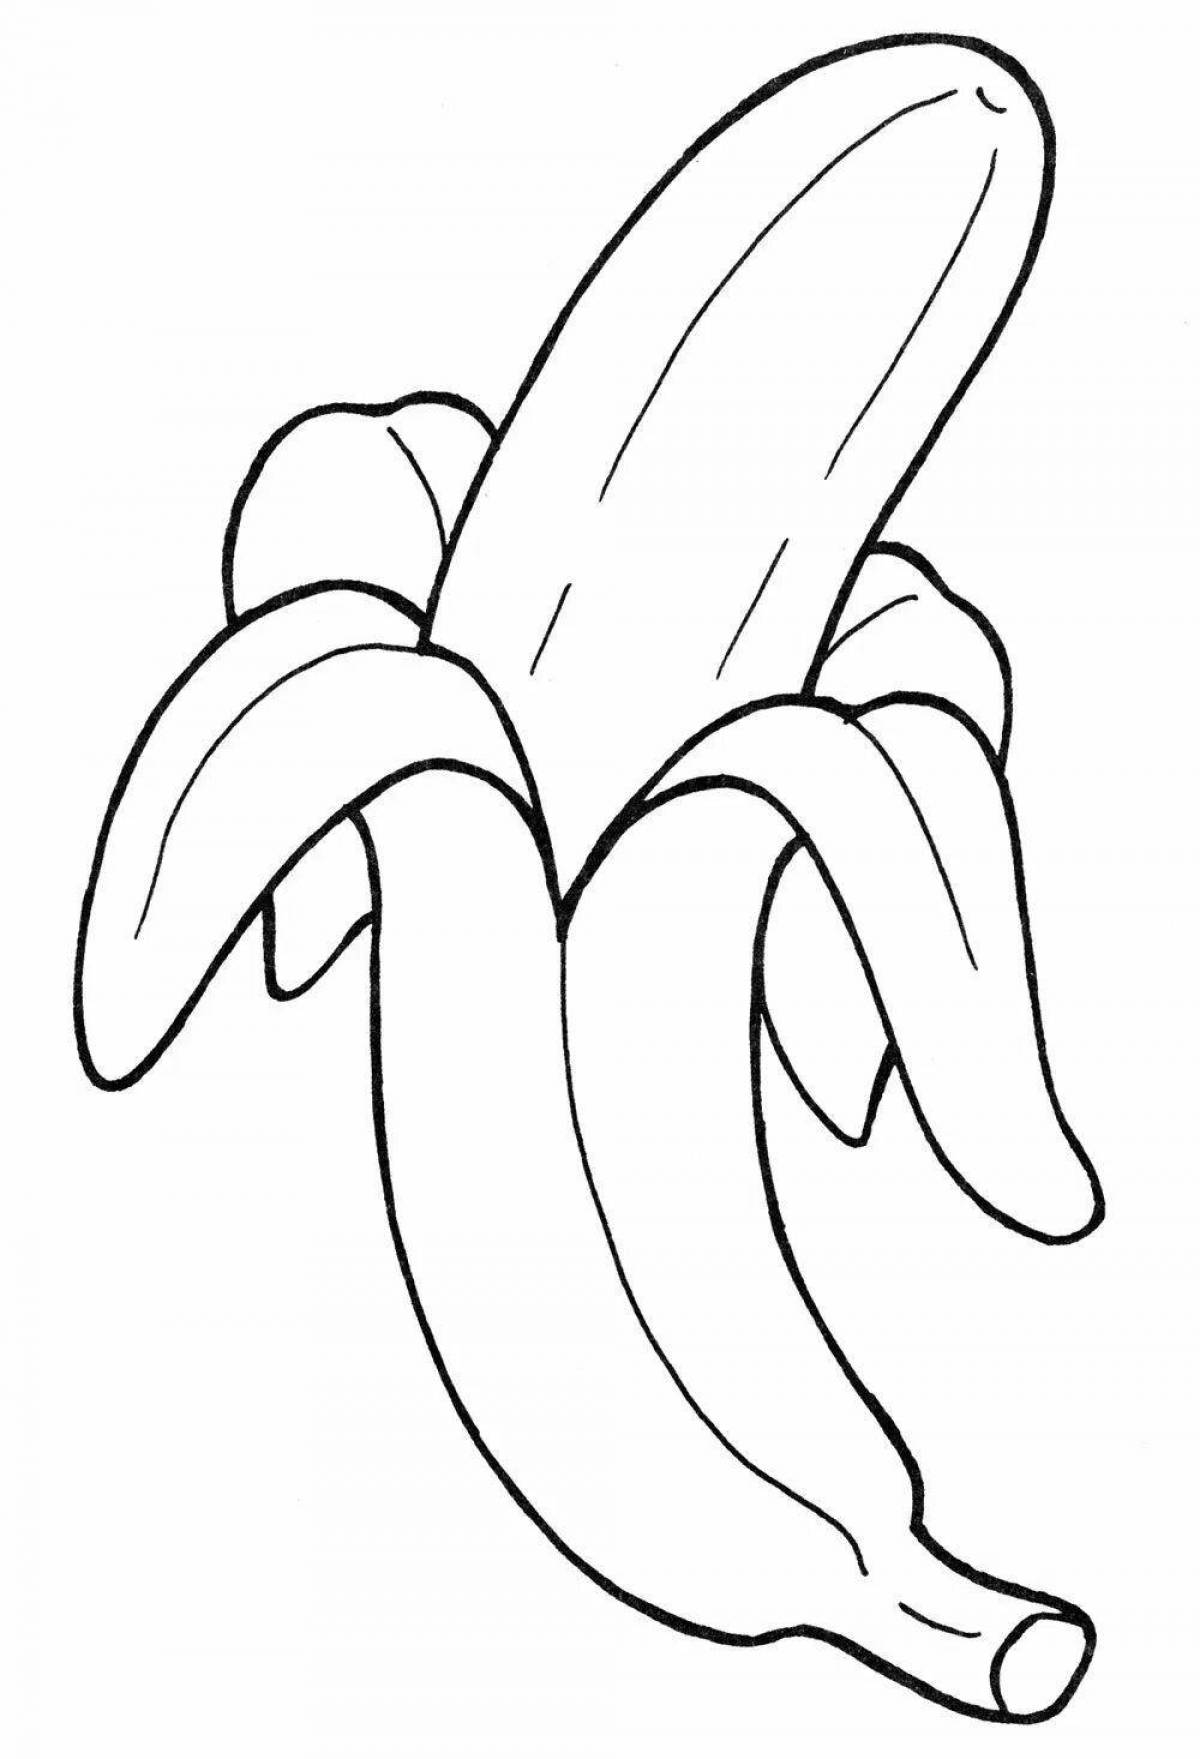 A fun banana coloring book for 3-4 year olds